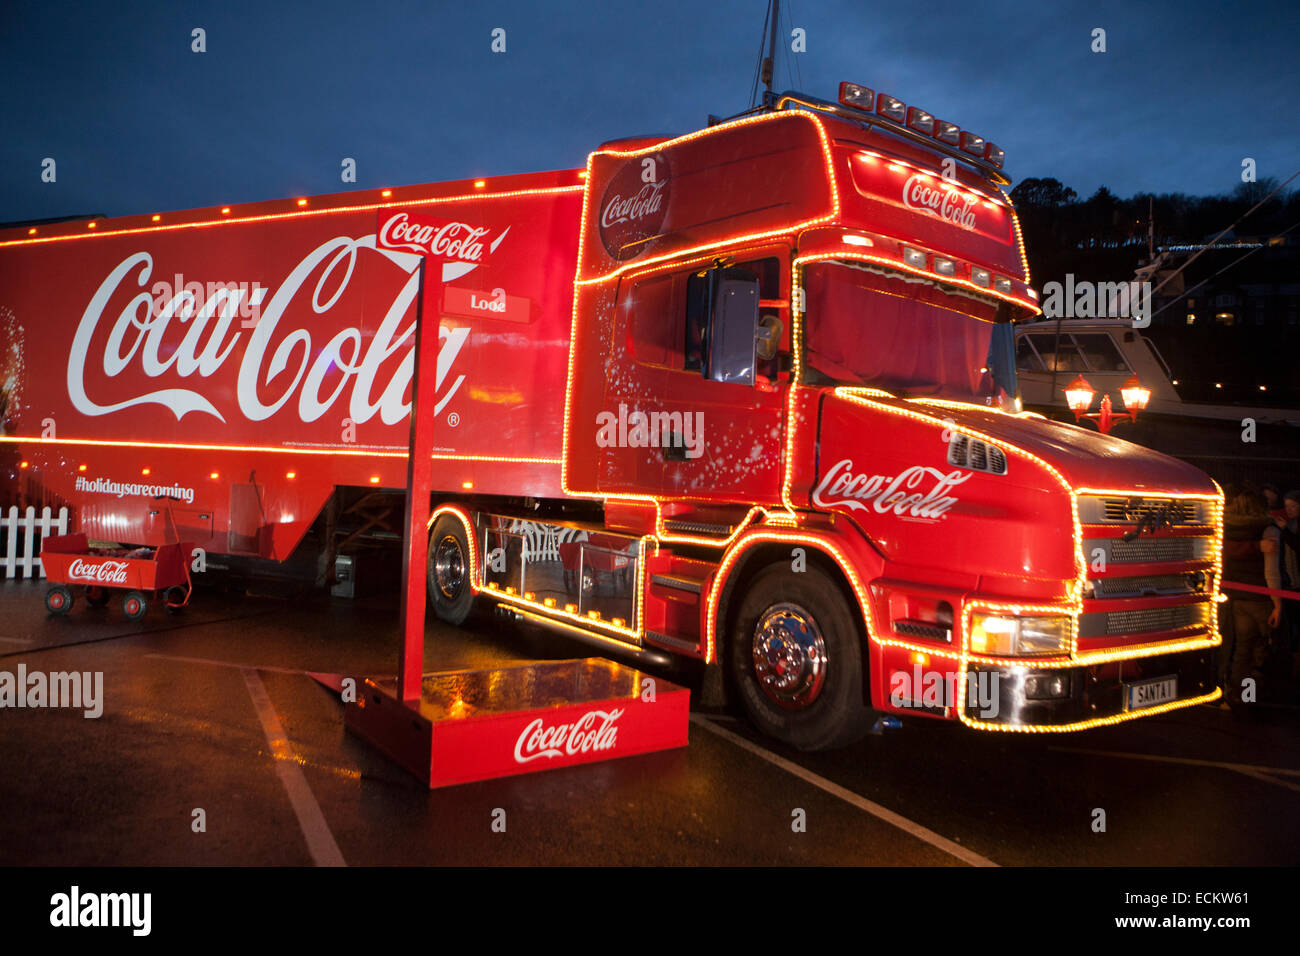 Coca Cola Truck High Resolution Stock Photography and Images - Alamy